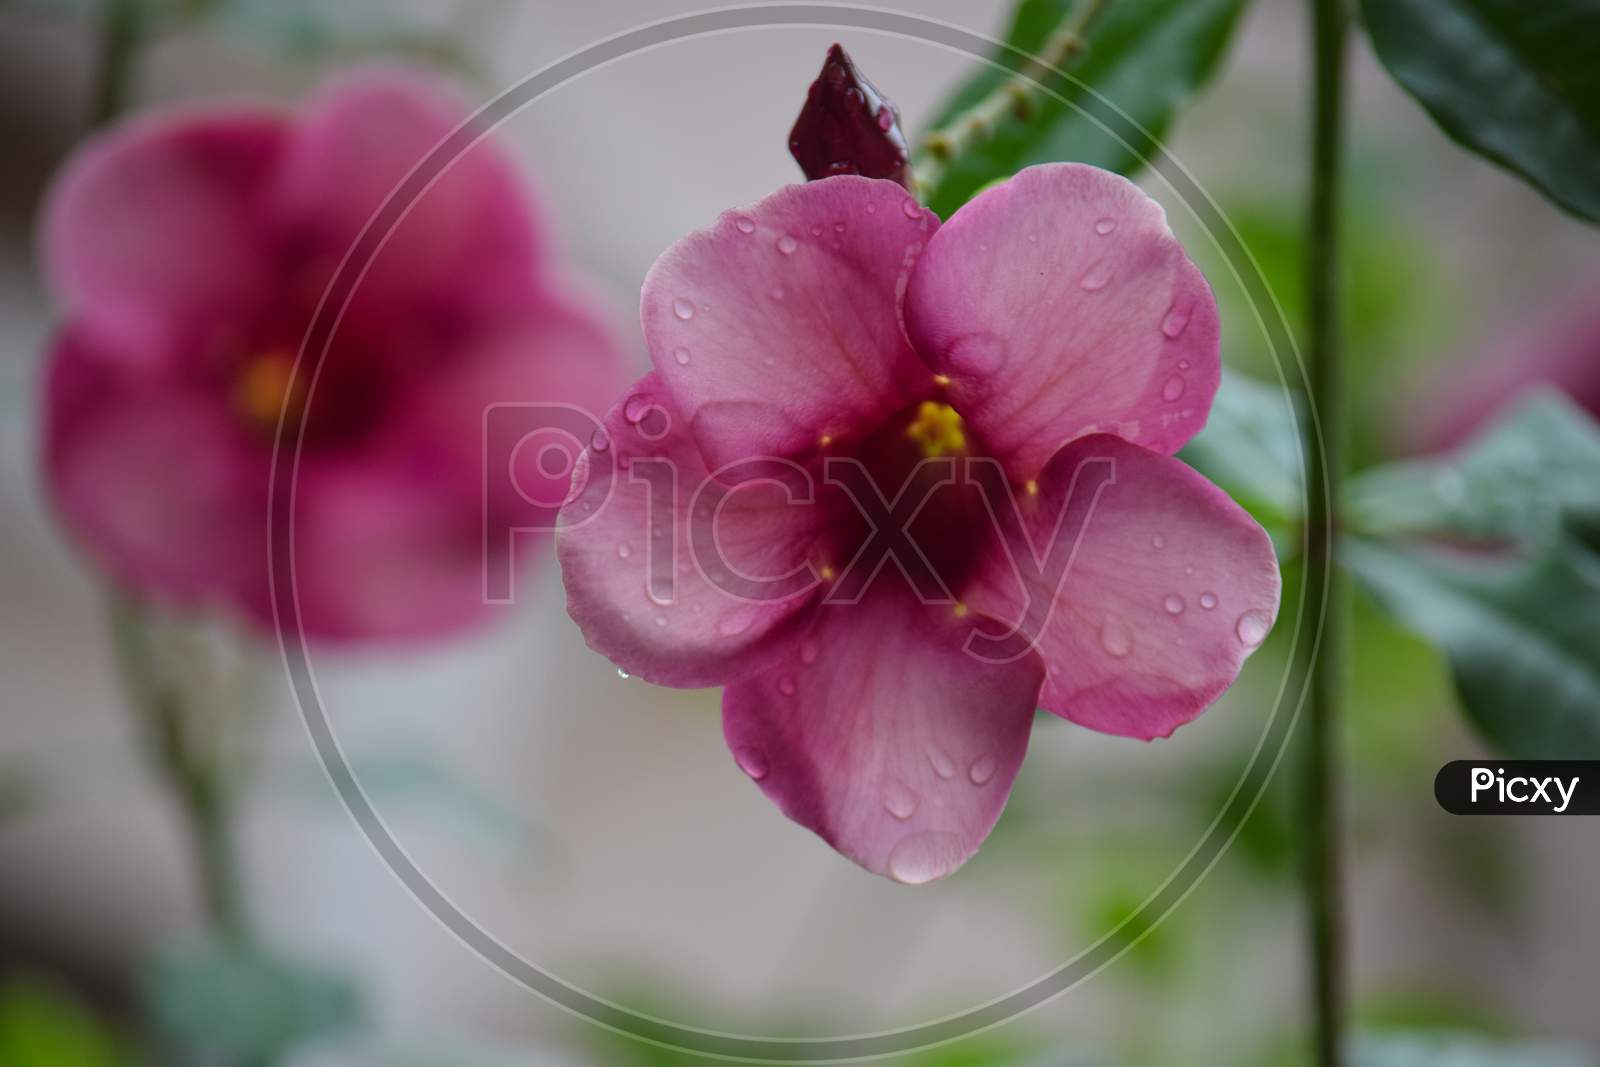 Beautiful Pink Color Flower At Outdoor, Raindrops On Flower, Blurred Background, Green